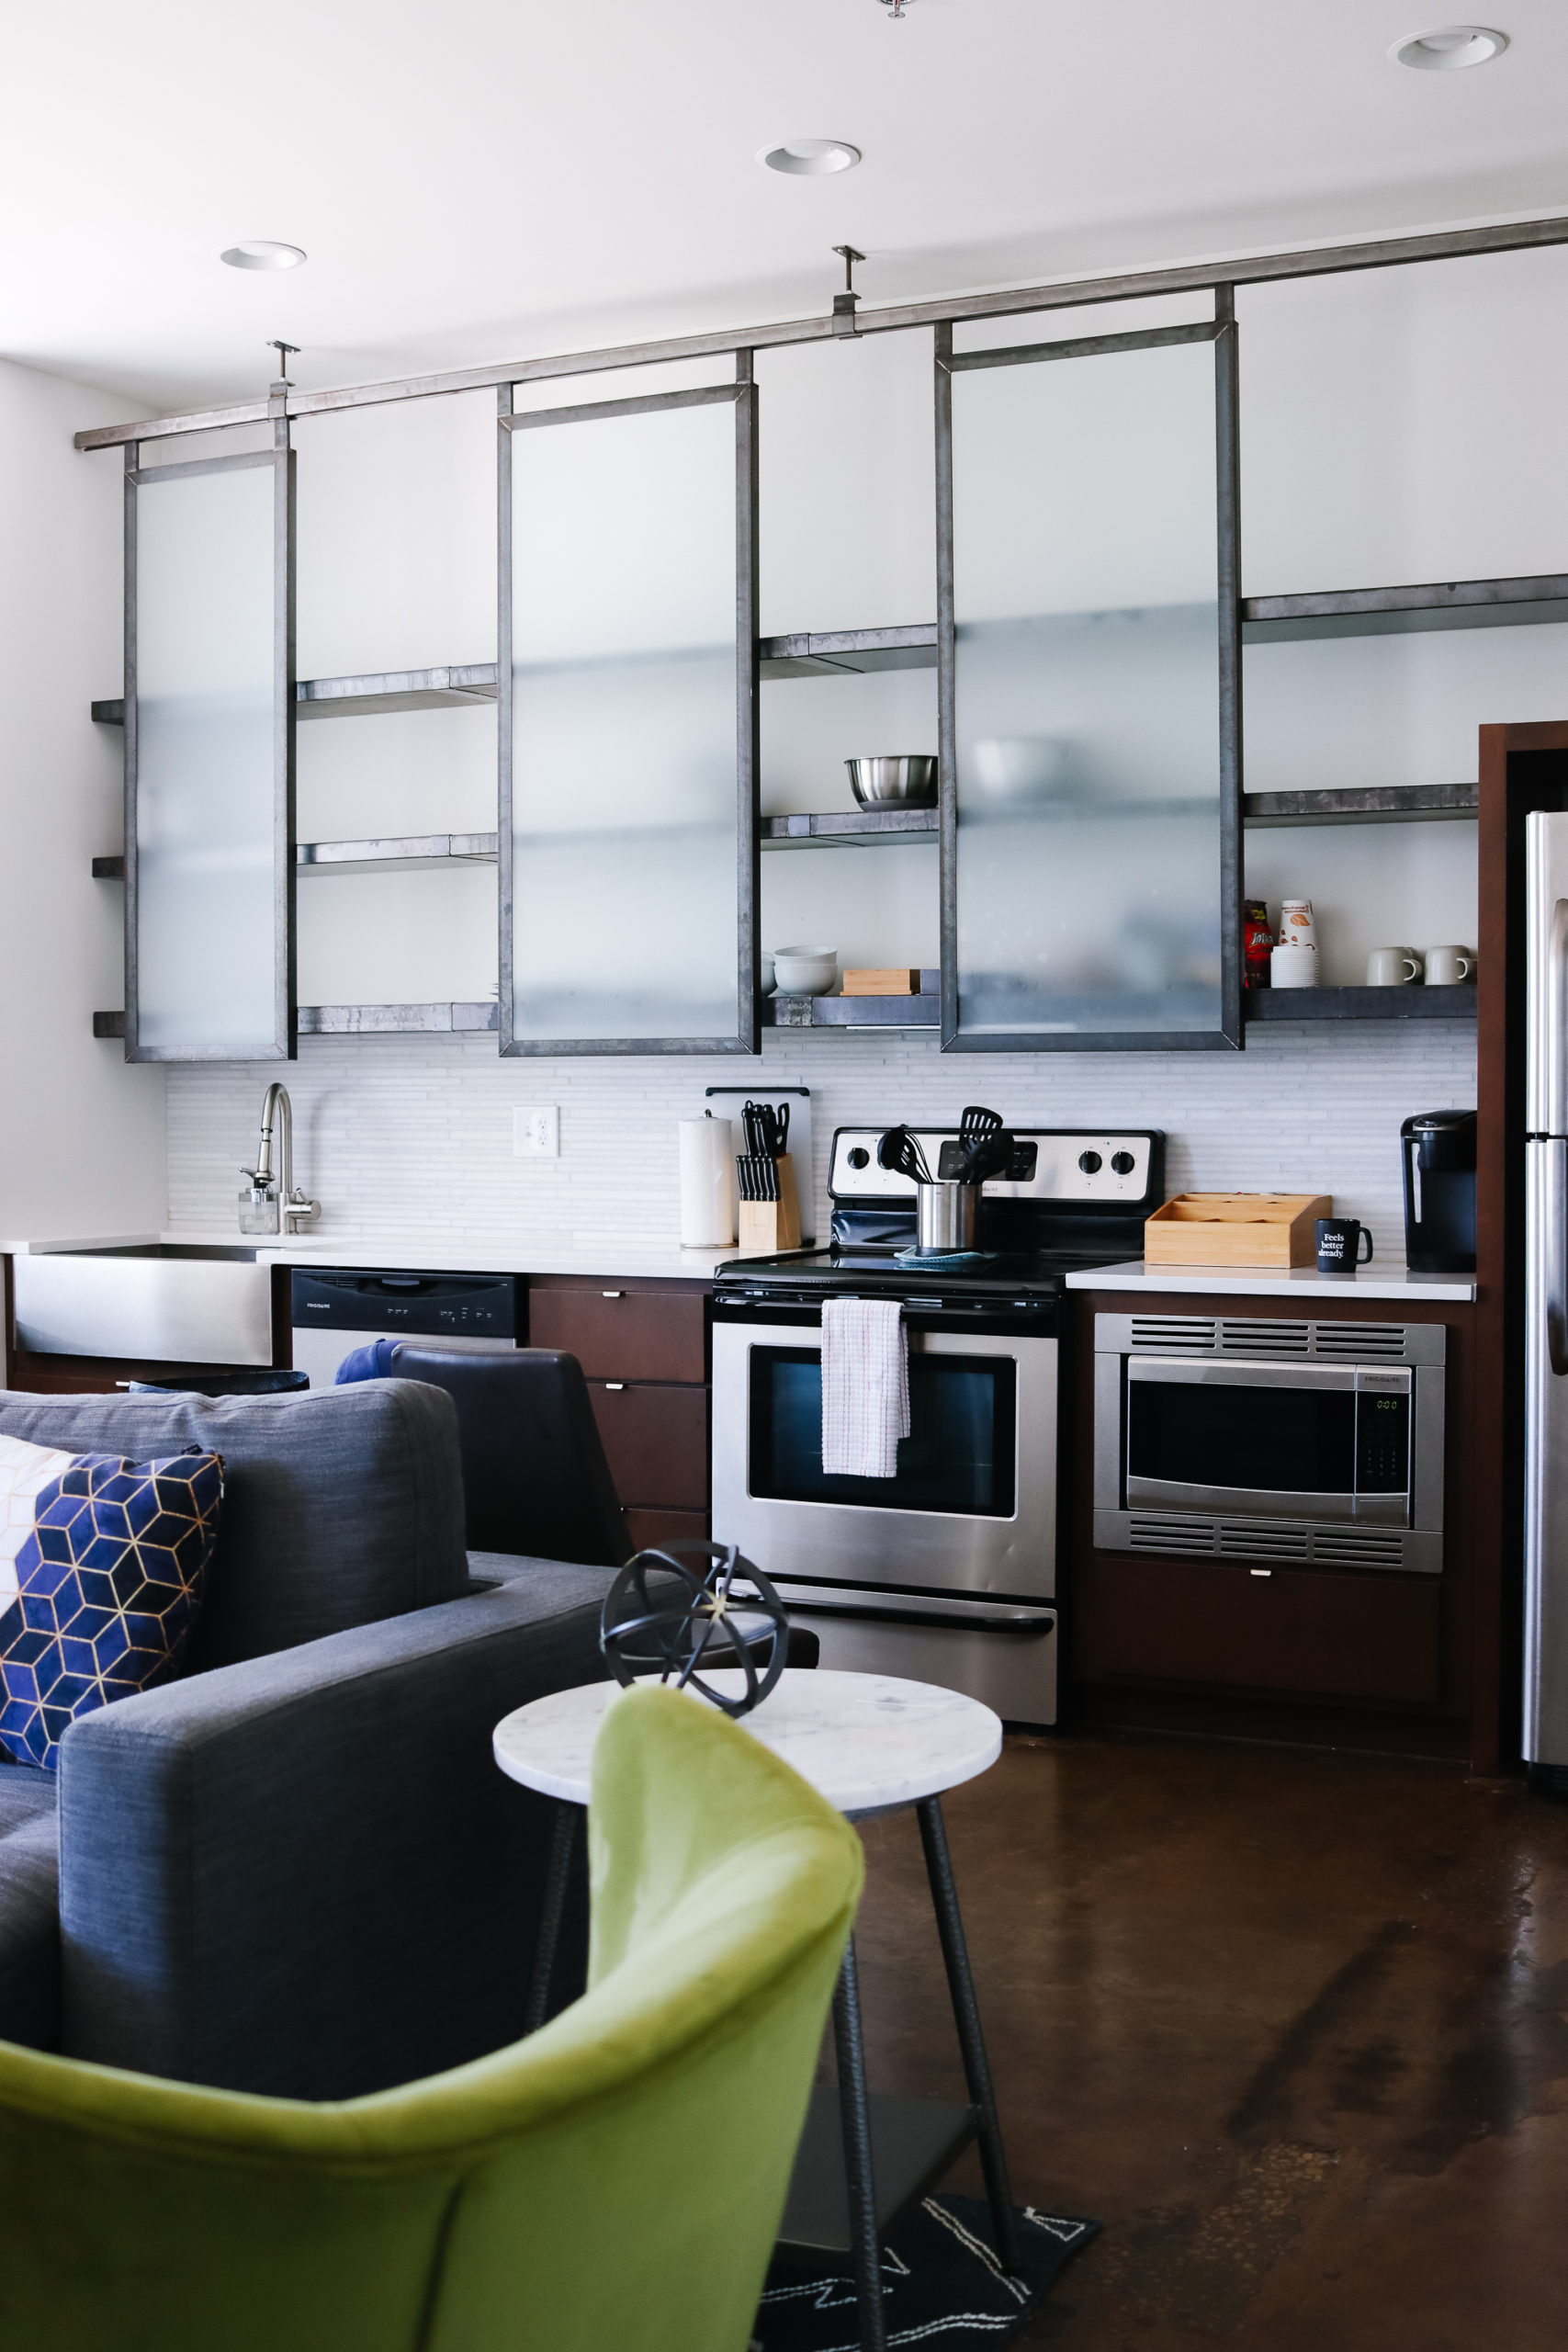 downtown Nashville airbnb | modern industrial style